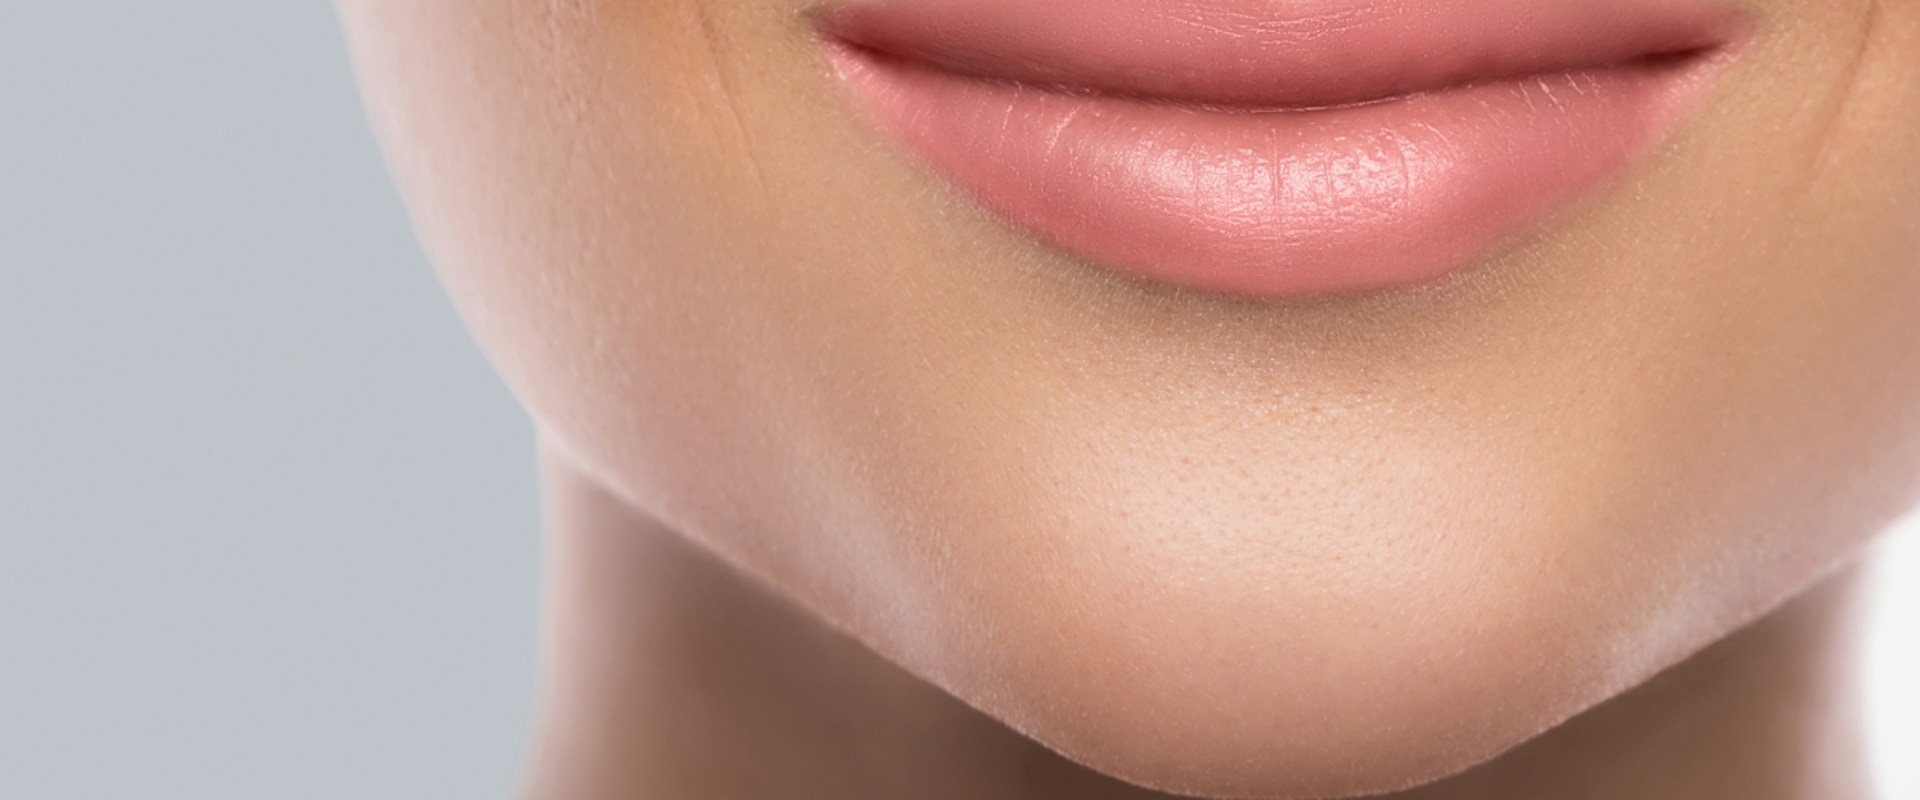 What juvederm is best for lips?